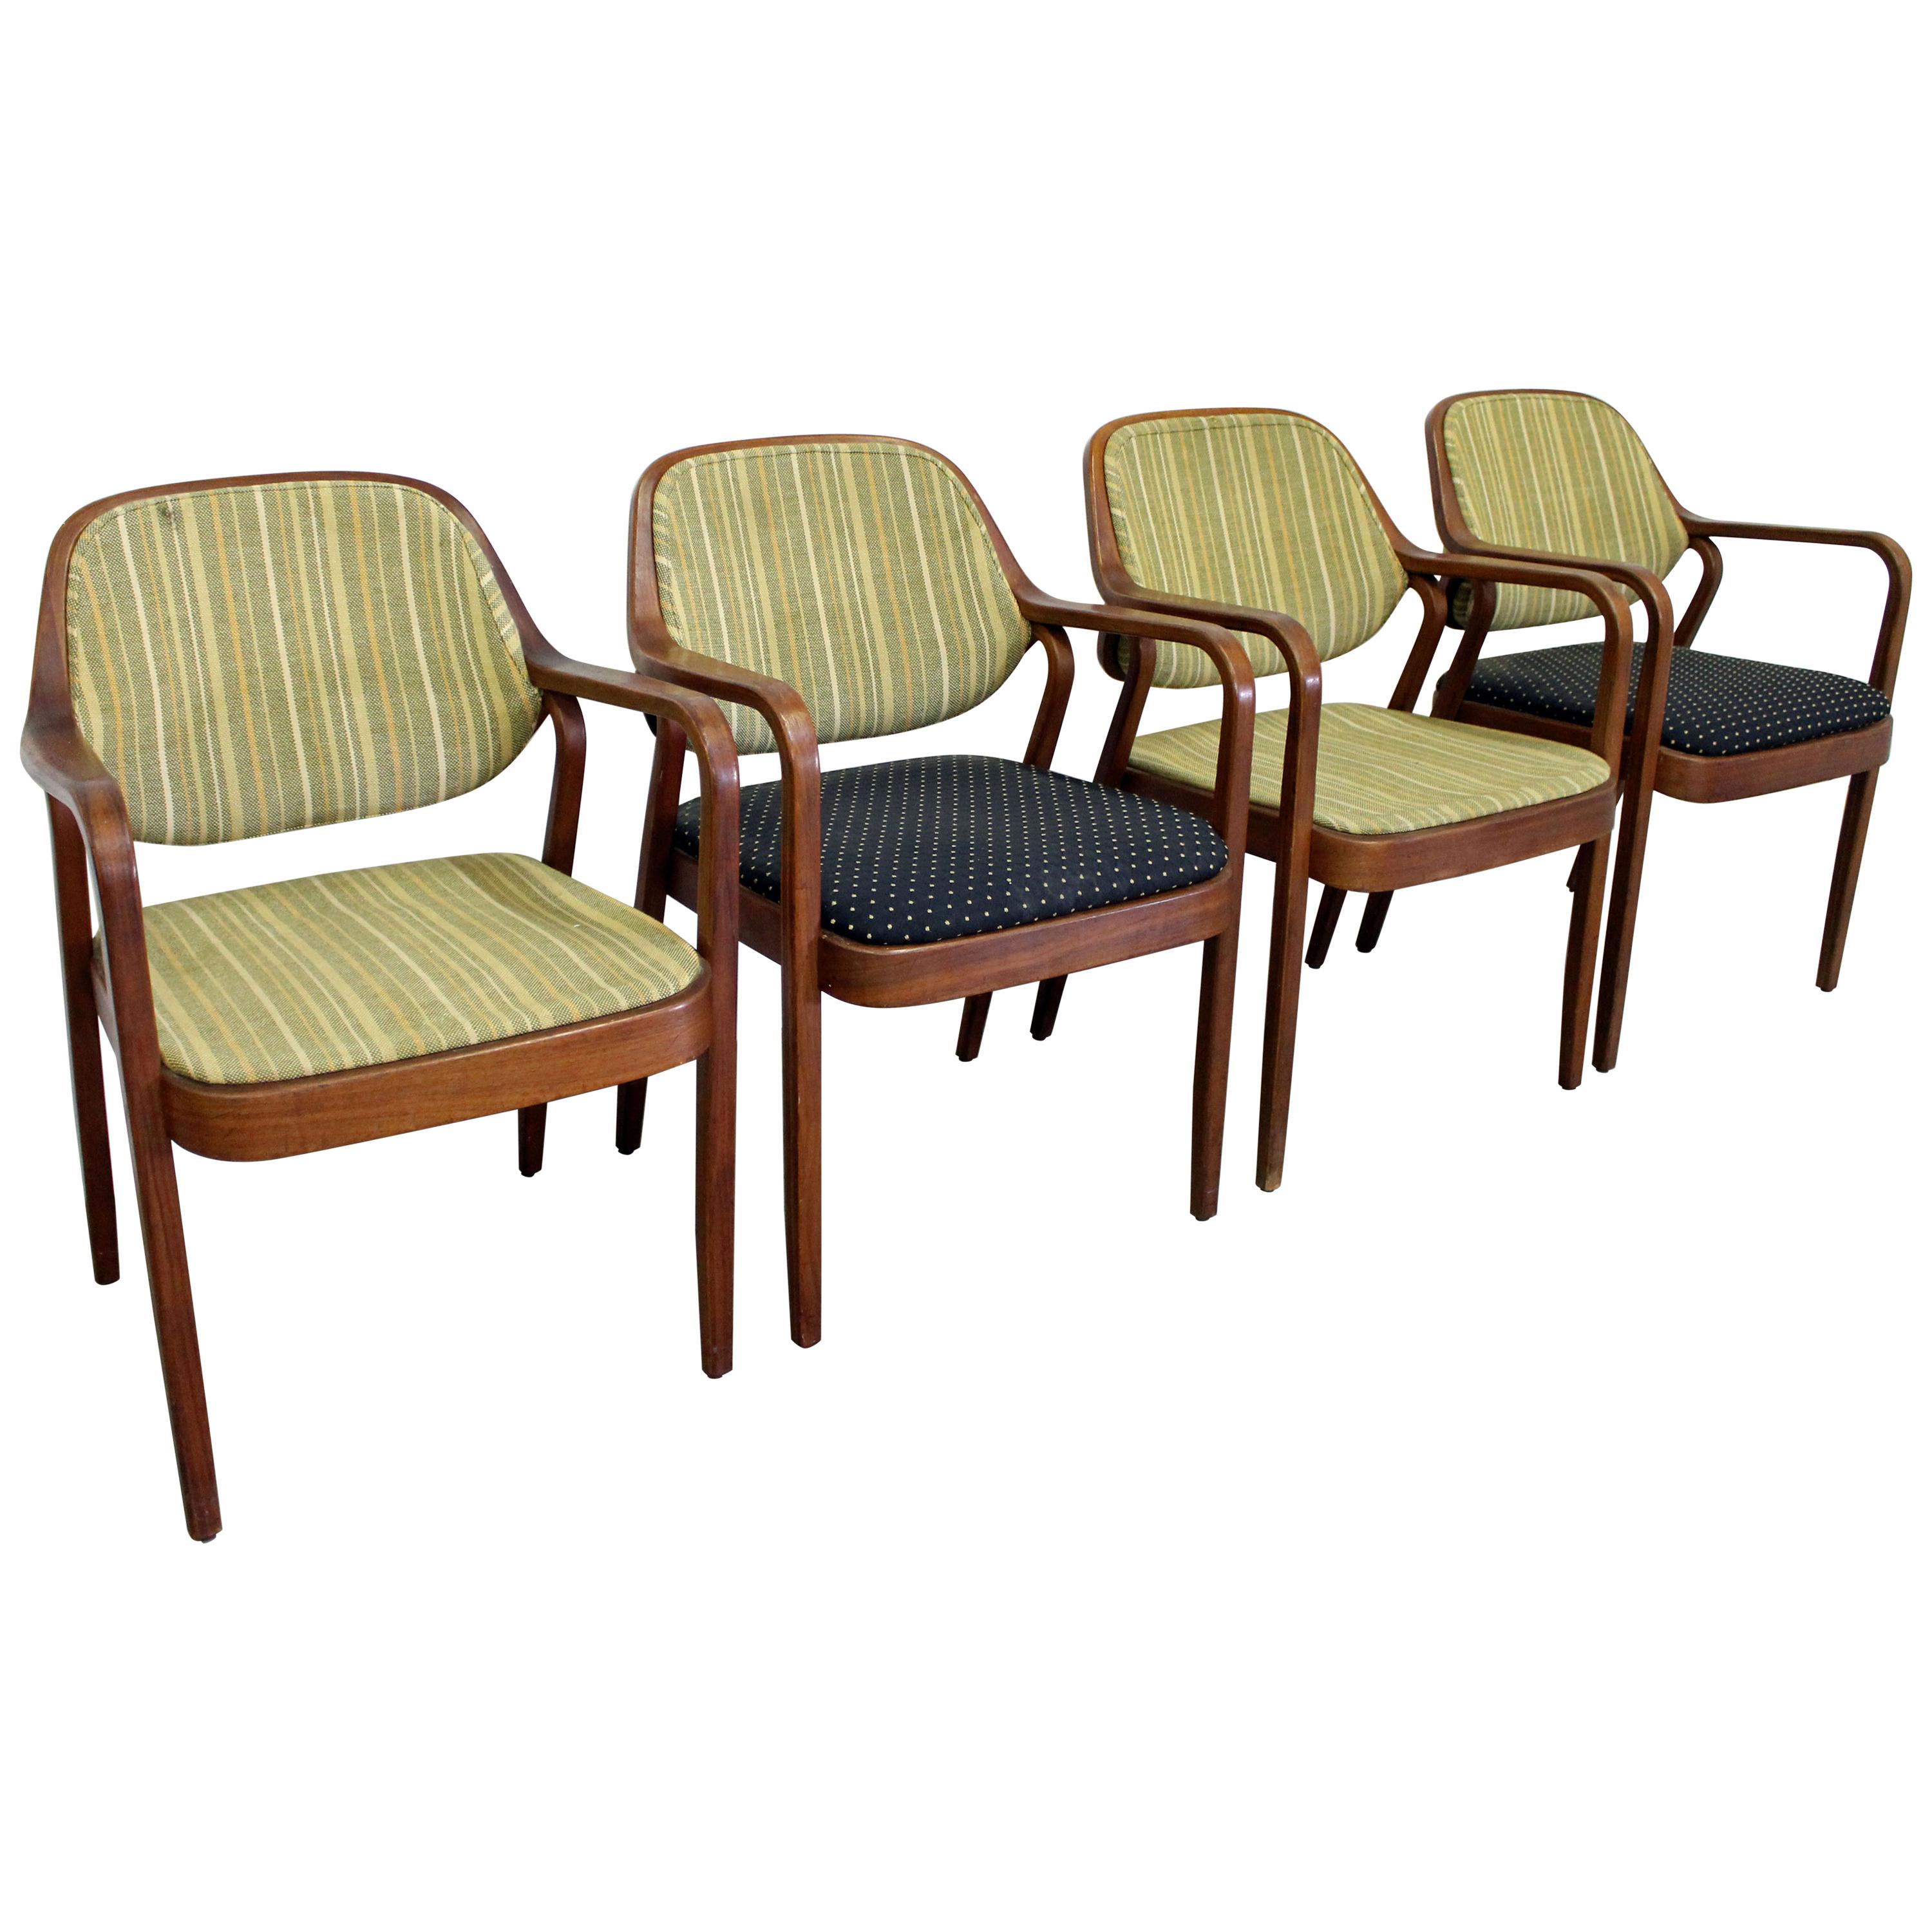 Set of 4 Mid-Century Modern Don Pettit for Knoll Walnut Dining Armchairs